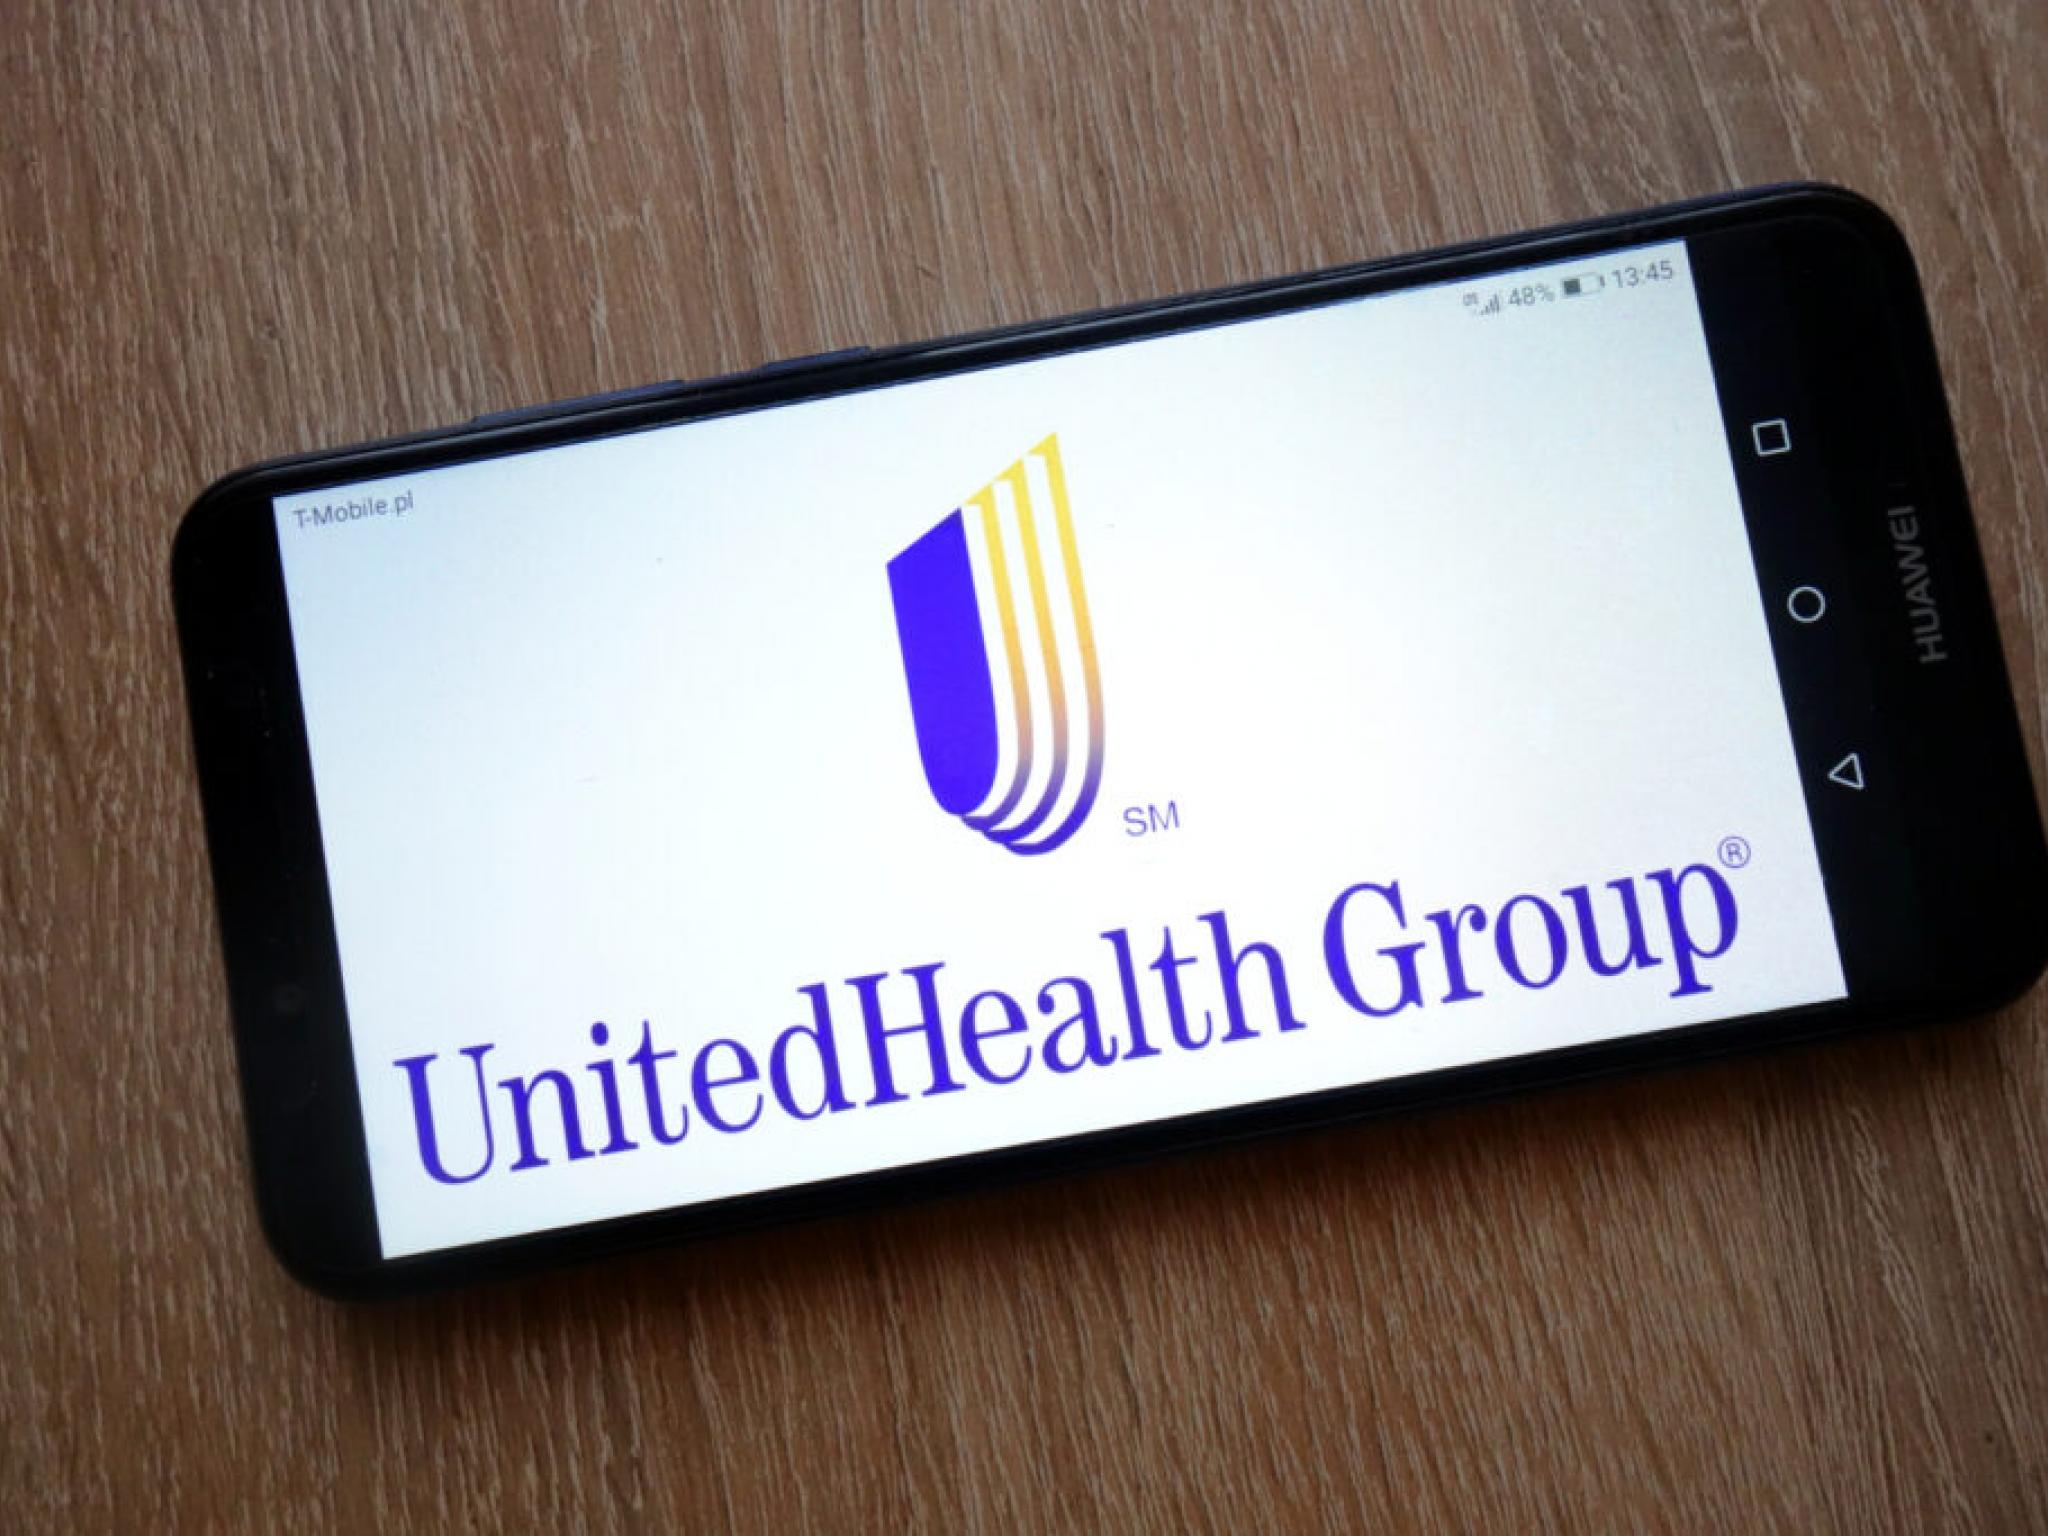  unitedhealth-edwards-lifesciences-first-citizens-bank-and-more-cnbcs-final-trades 